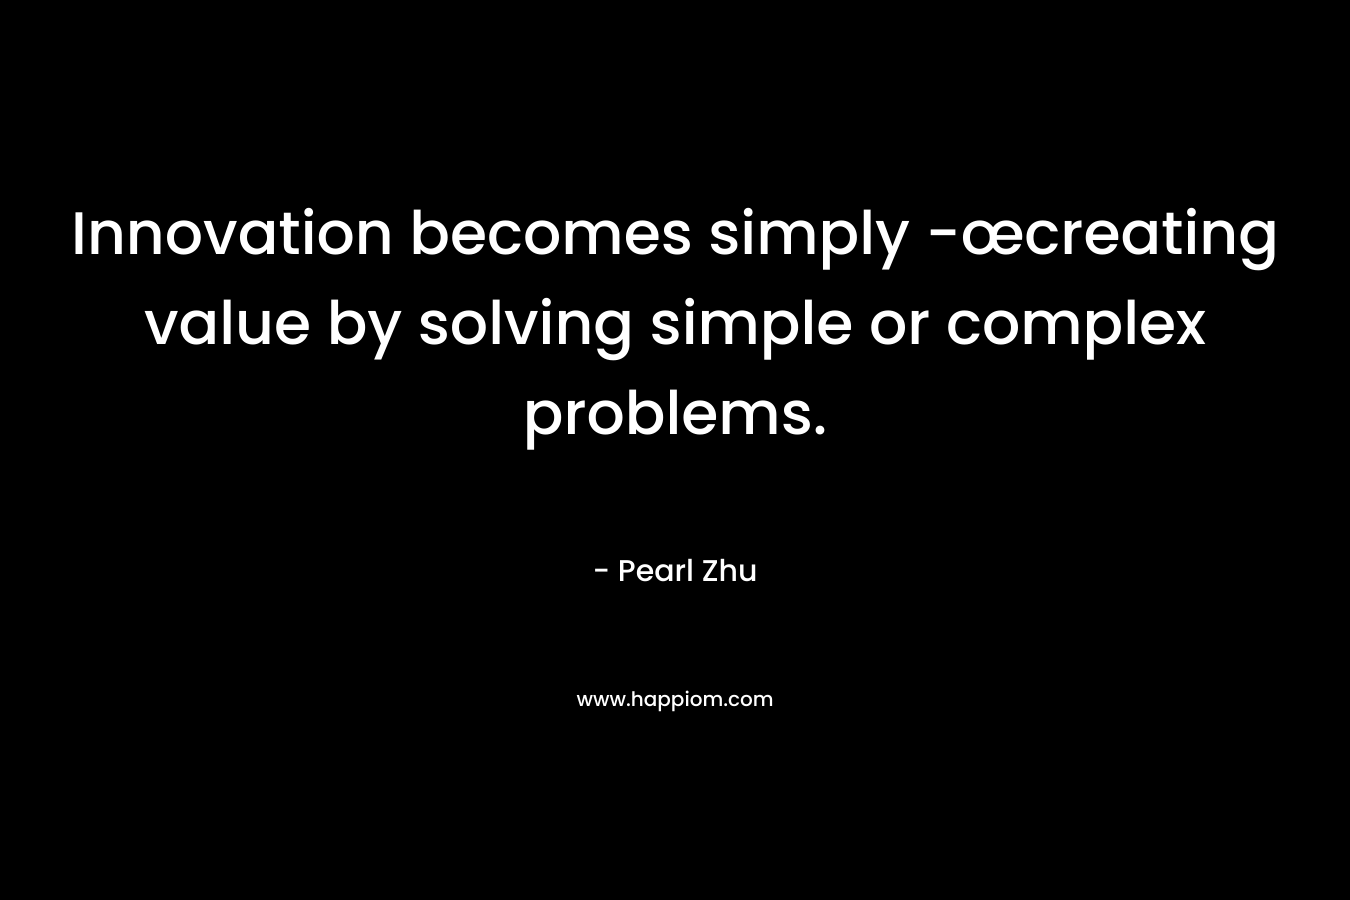 Innovation becomes simply -œcreating value by solving simple or complex problems.